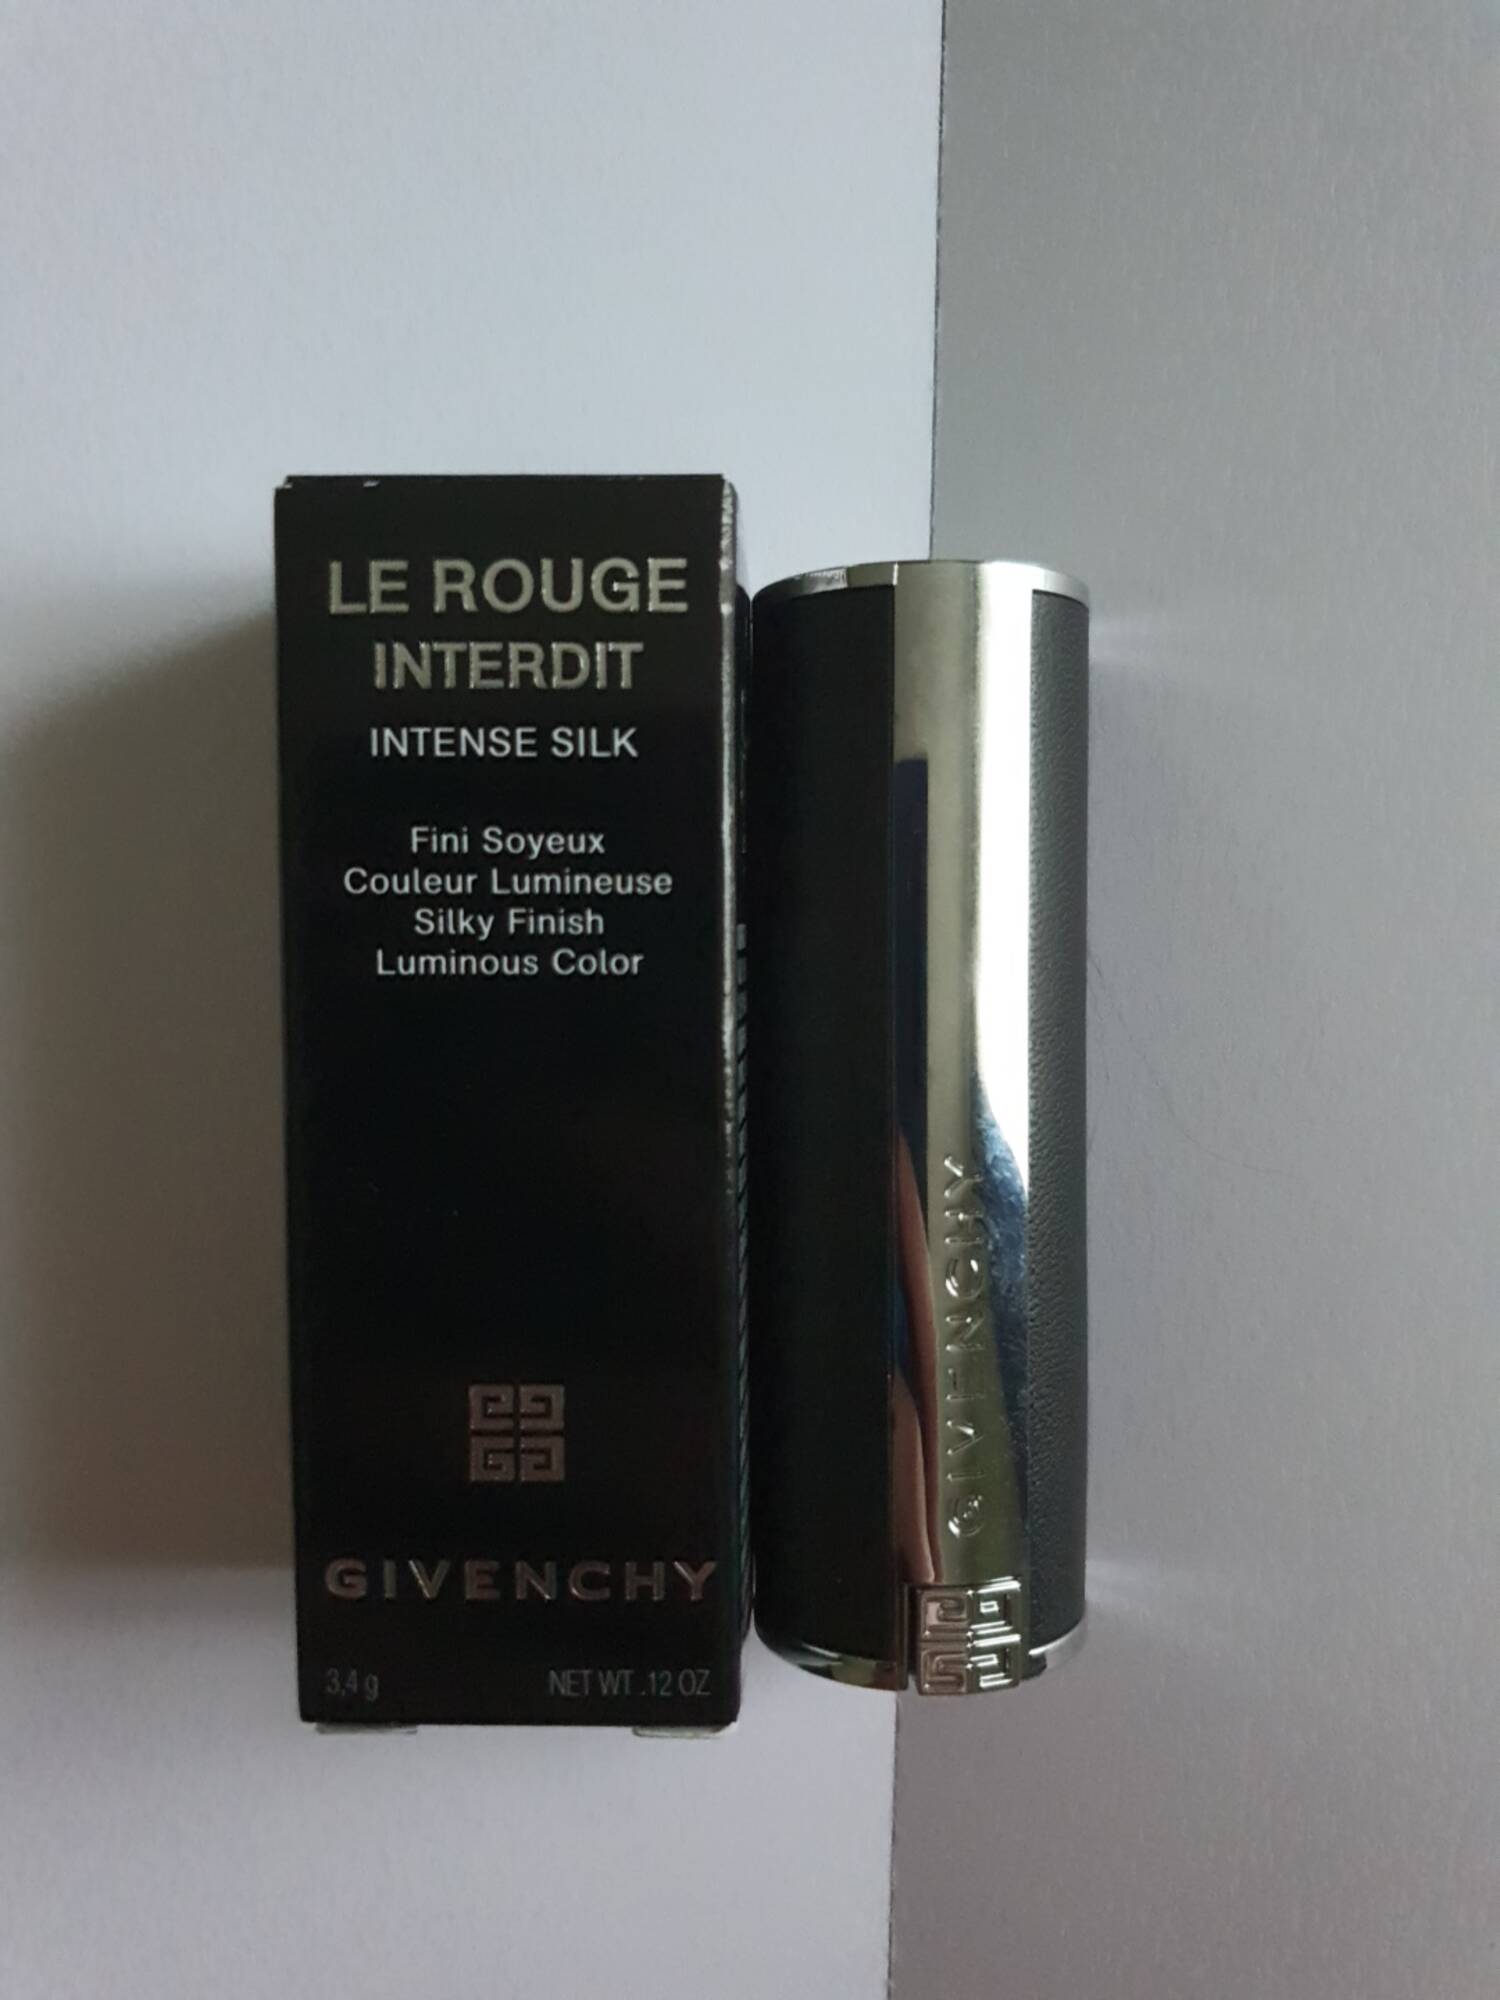 GIVENCHY - Le rouge interdit intense silk